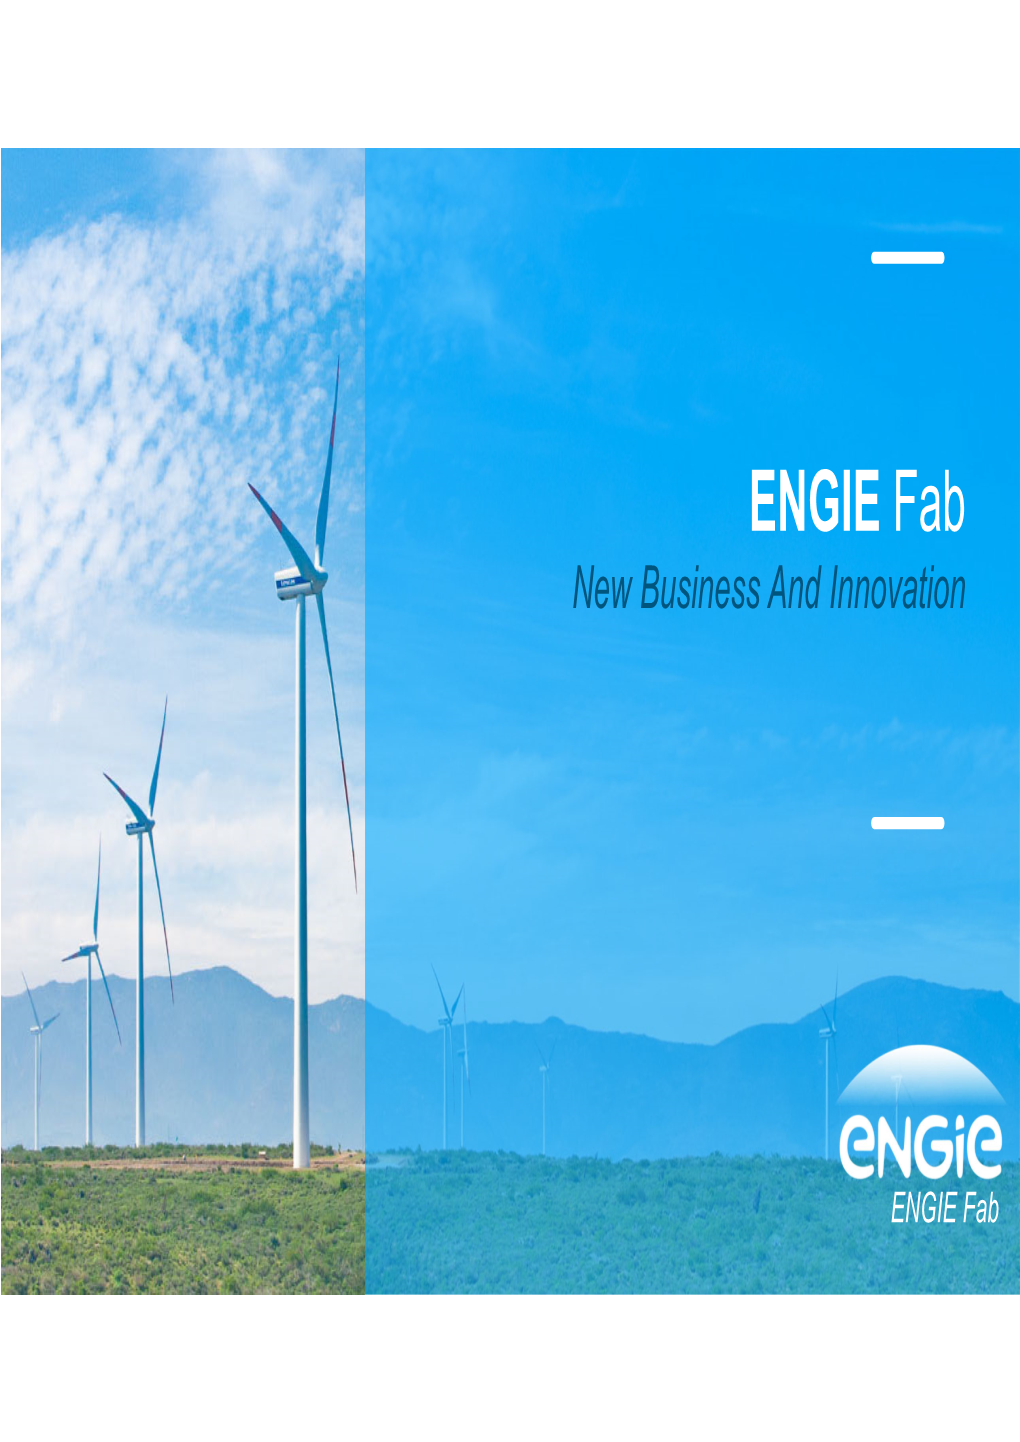 ENGIE Fab New Business and Innovation